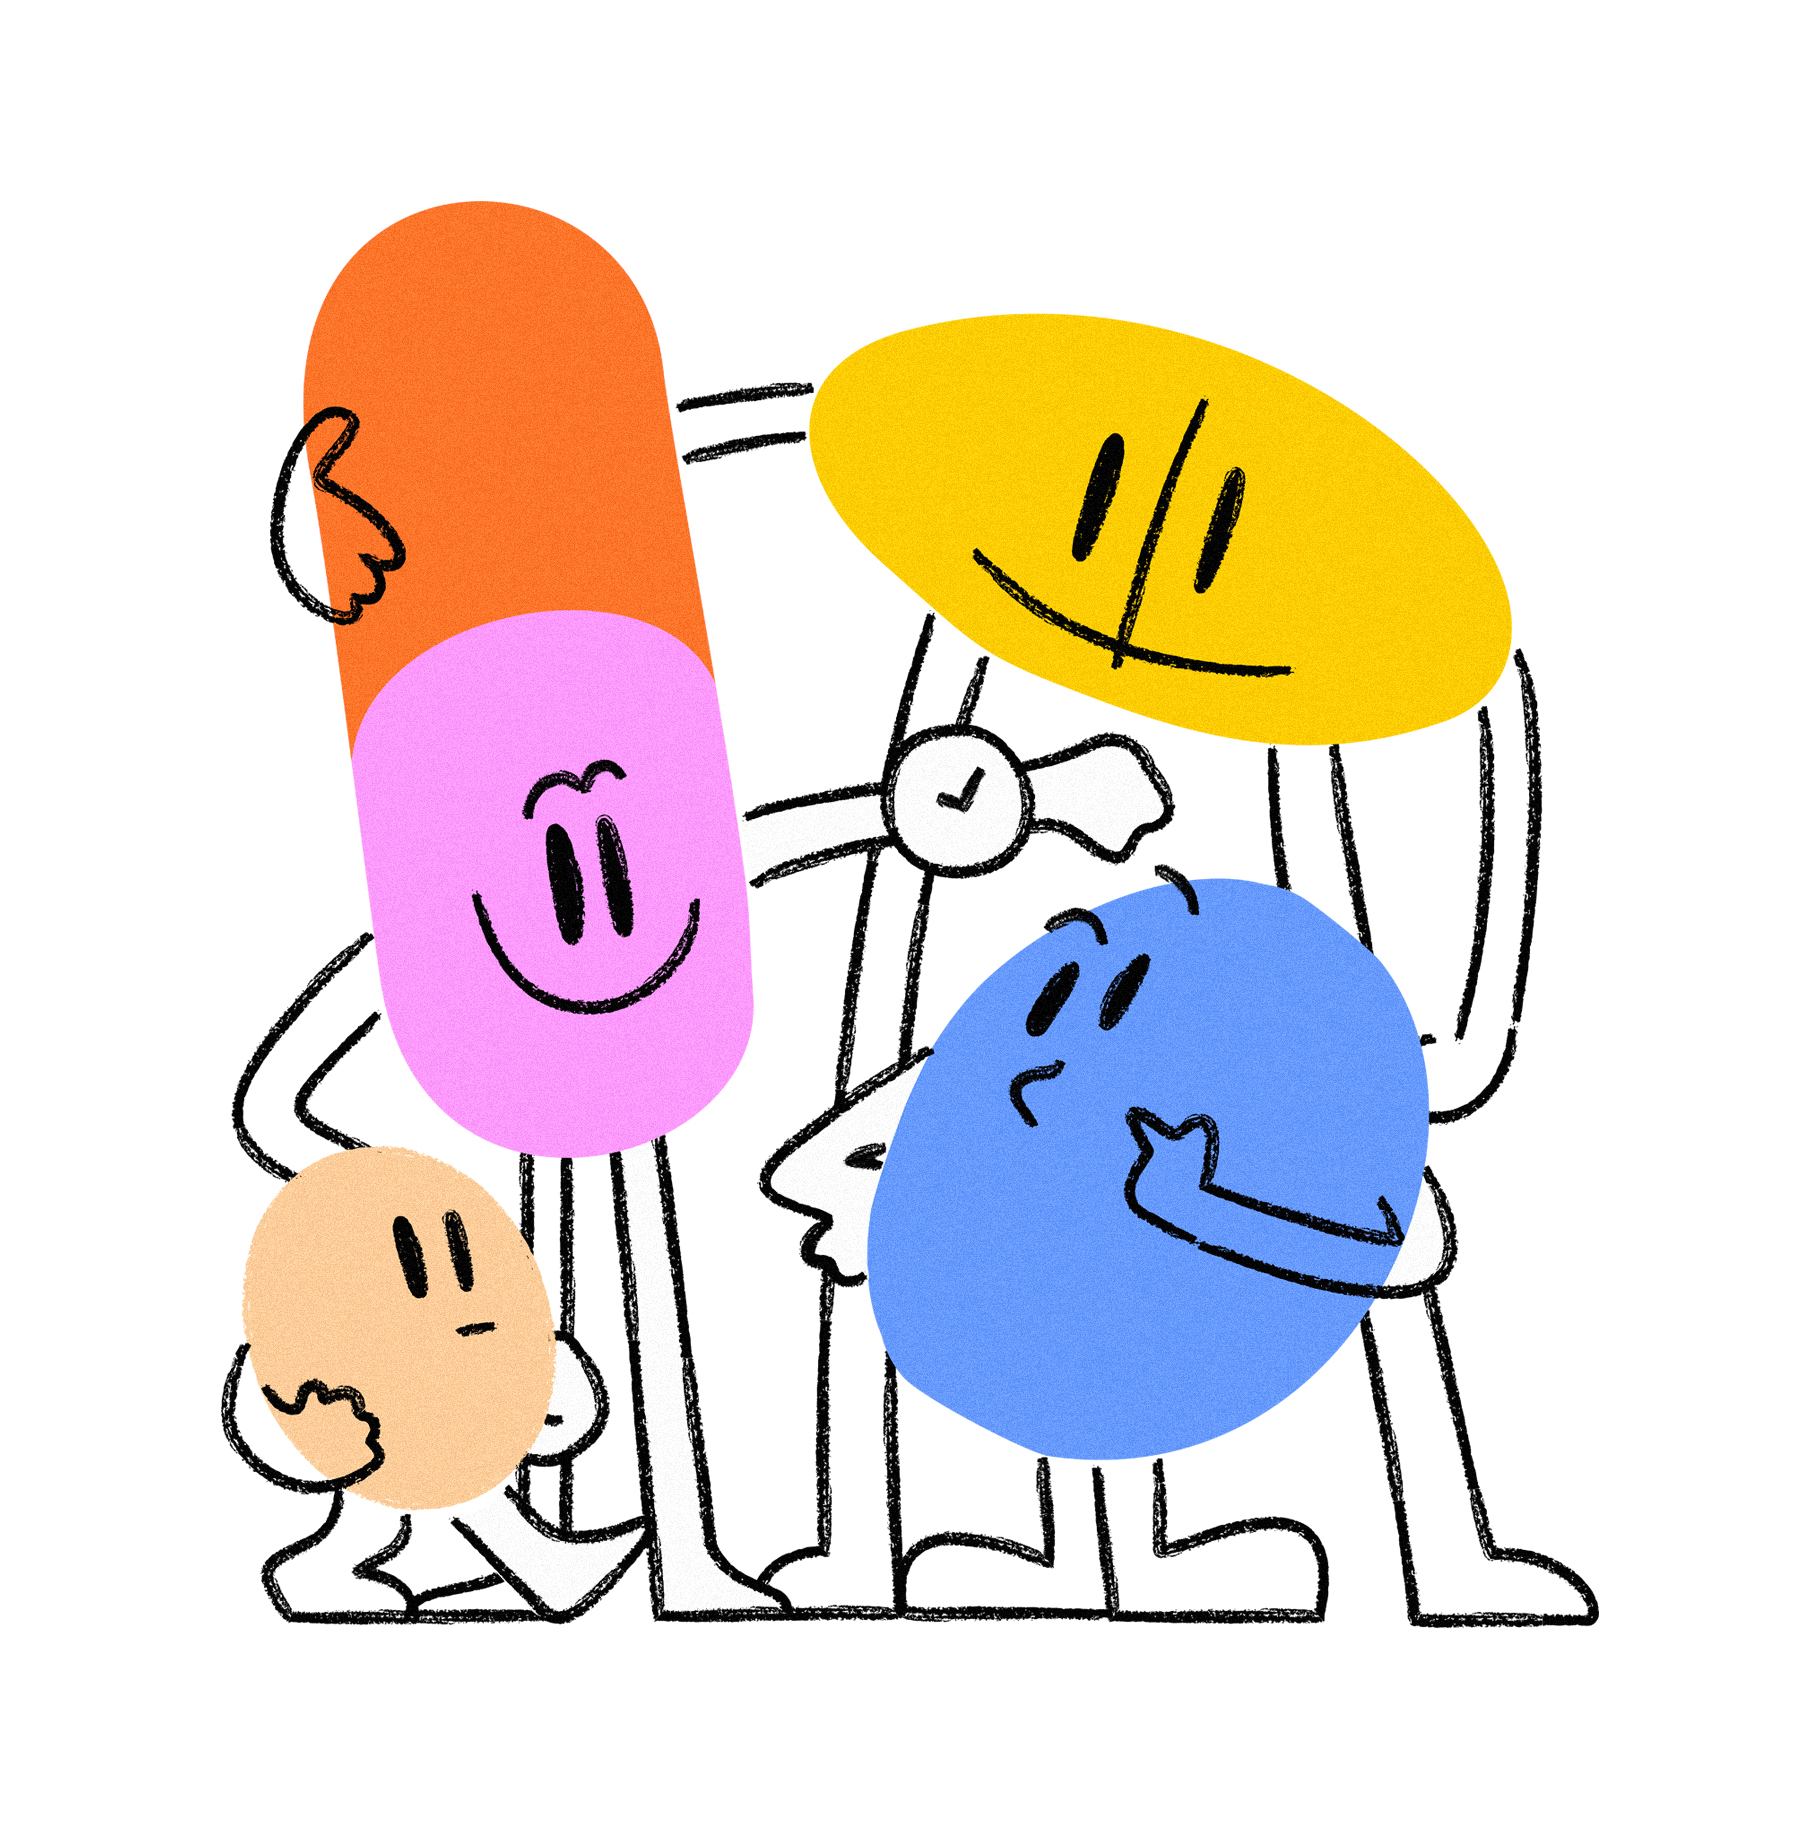 An illustration of 4 types of medications presented as fun characters showing the time